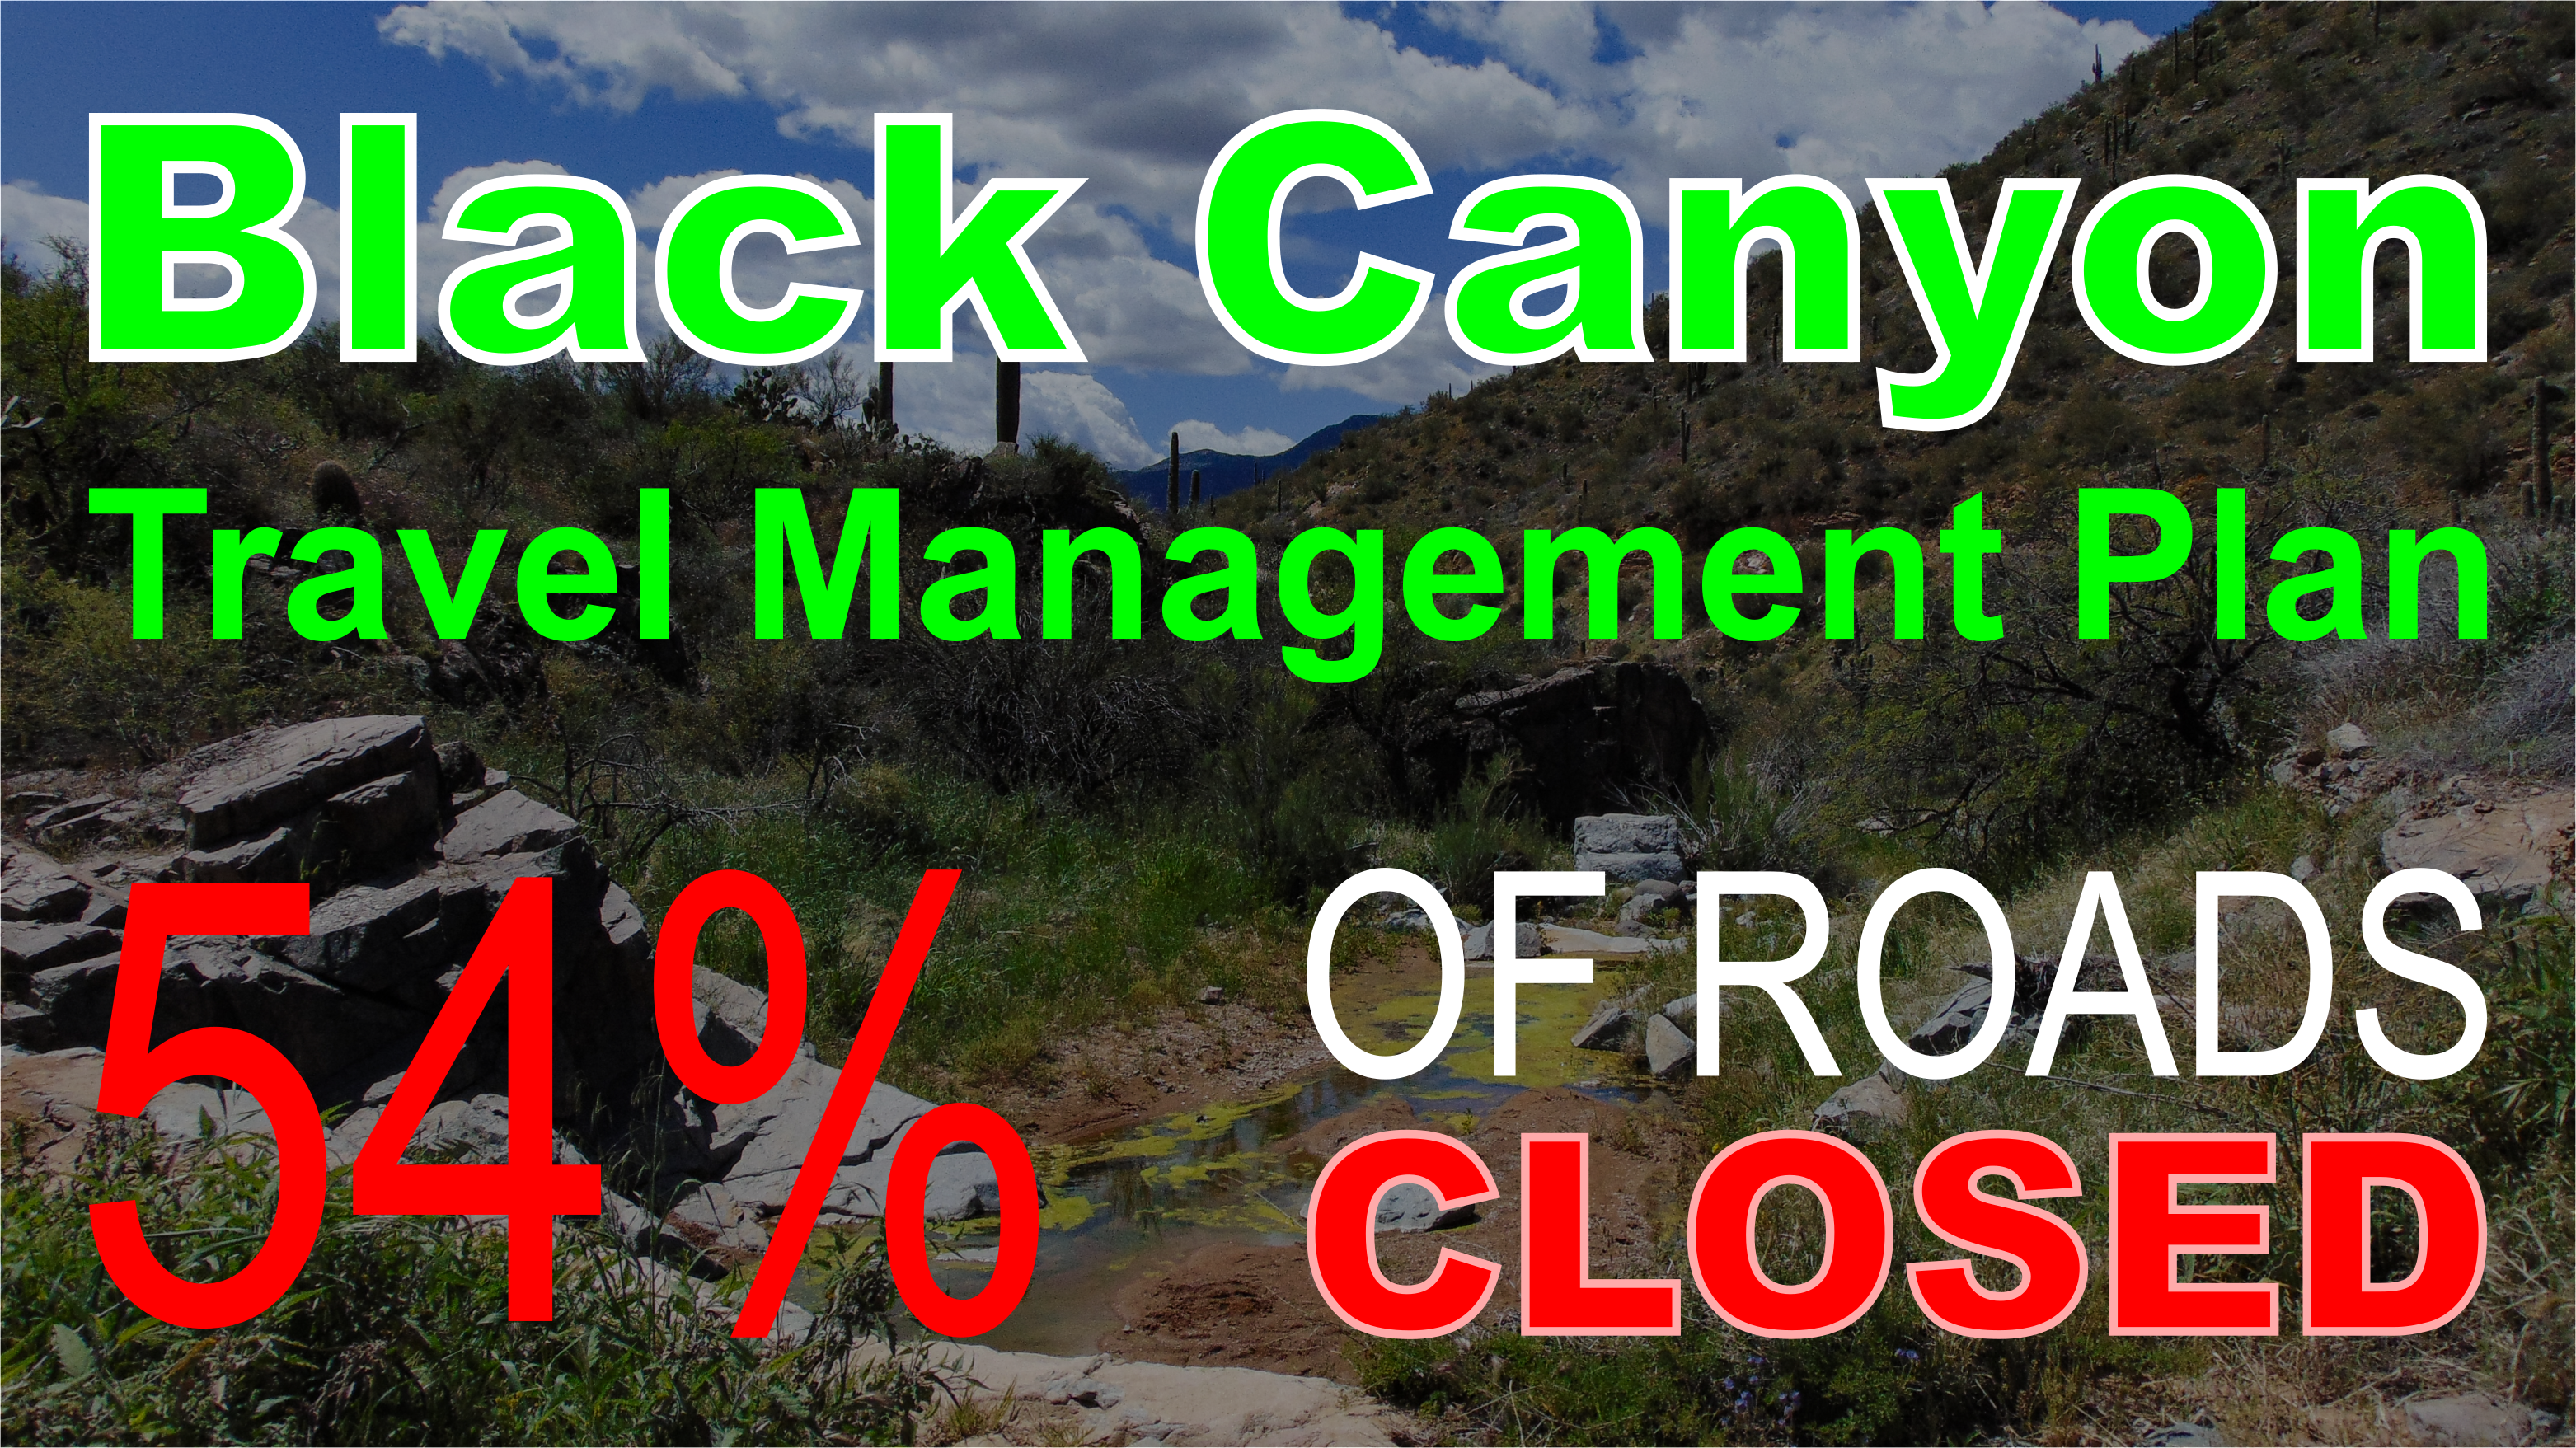 ACTION ALERT | 54% of Roads CLOSED Near Black Canyon | NEW PROPOSAL